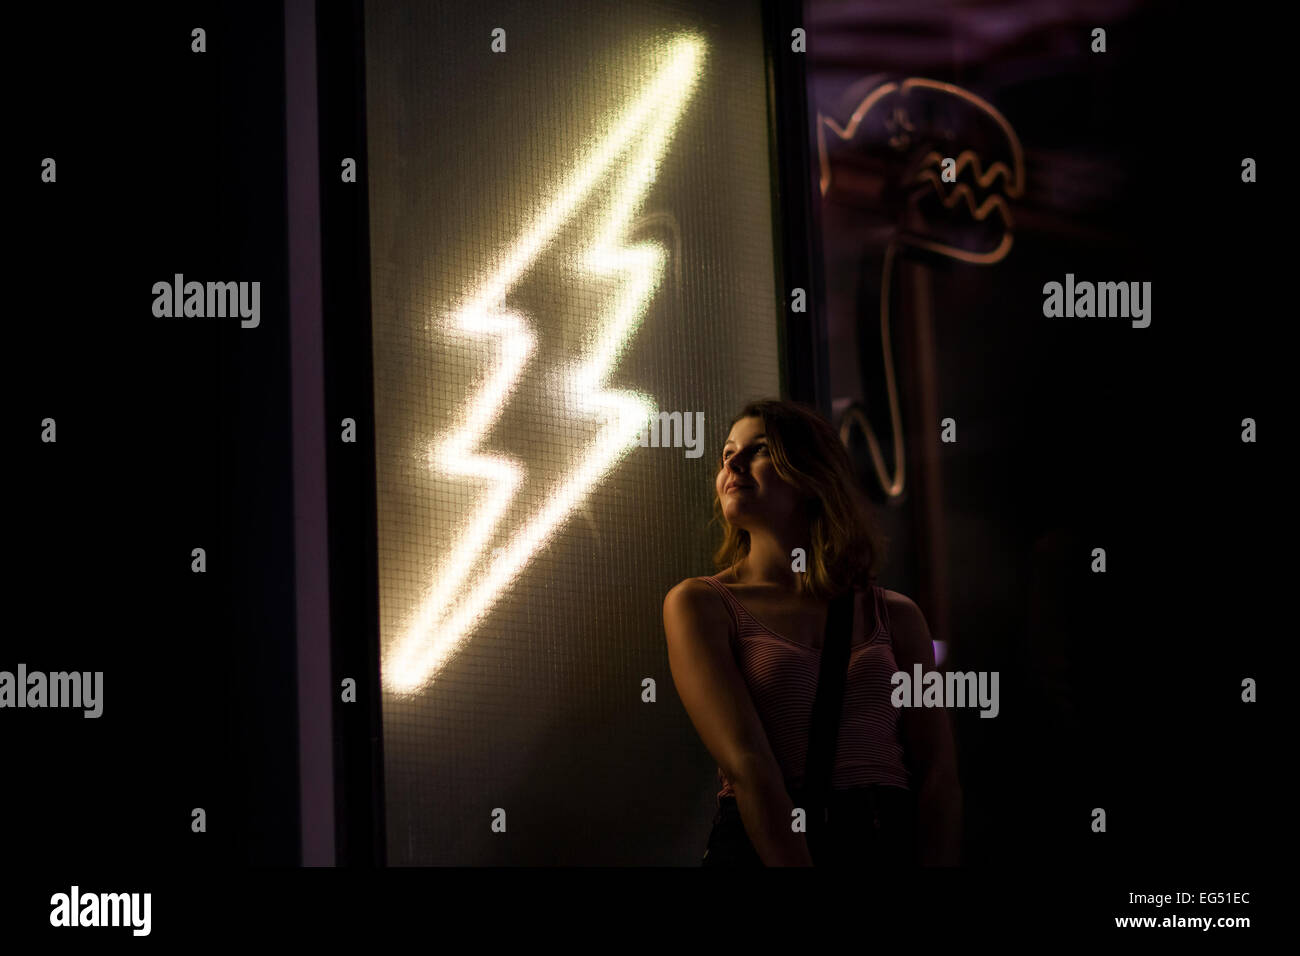 A portrait of a young woman lit by a neon sign Stock Photo